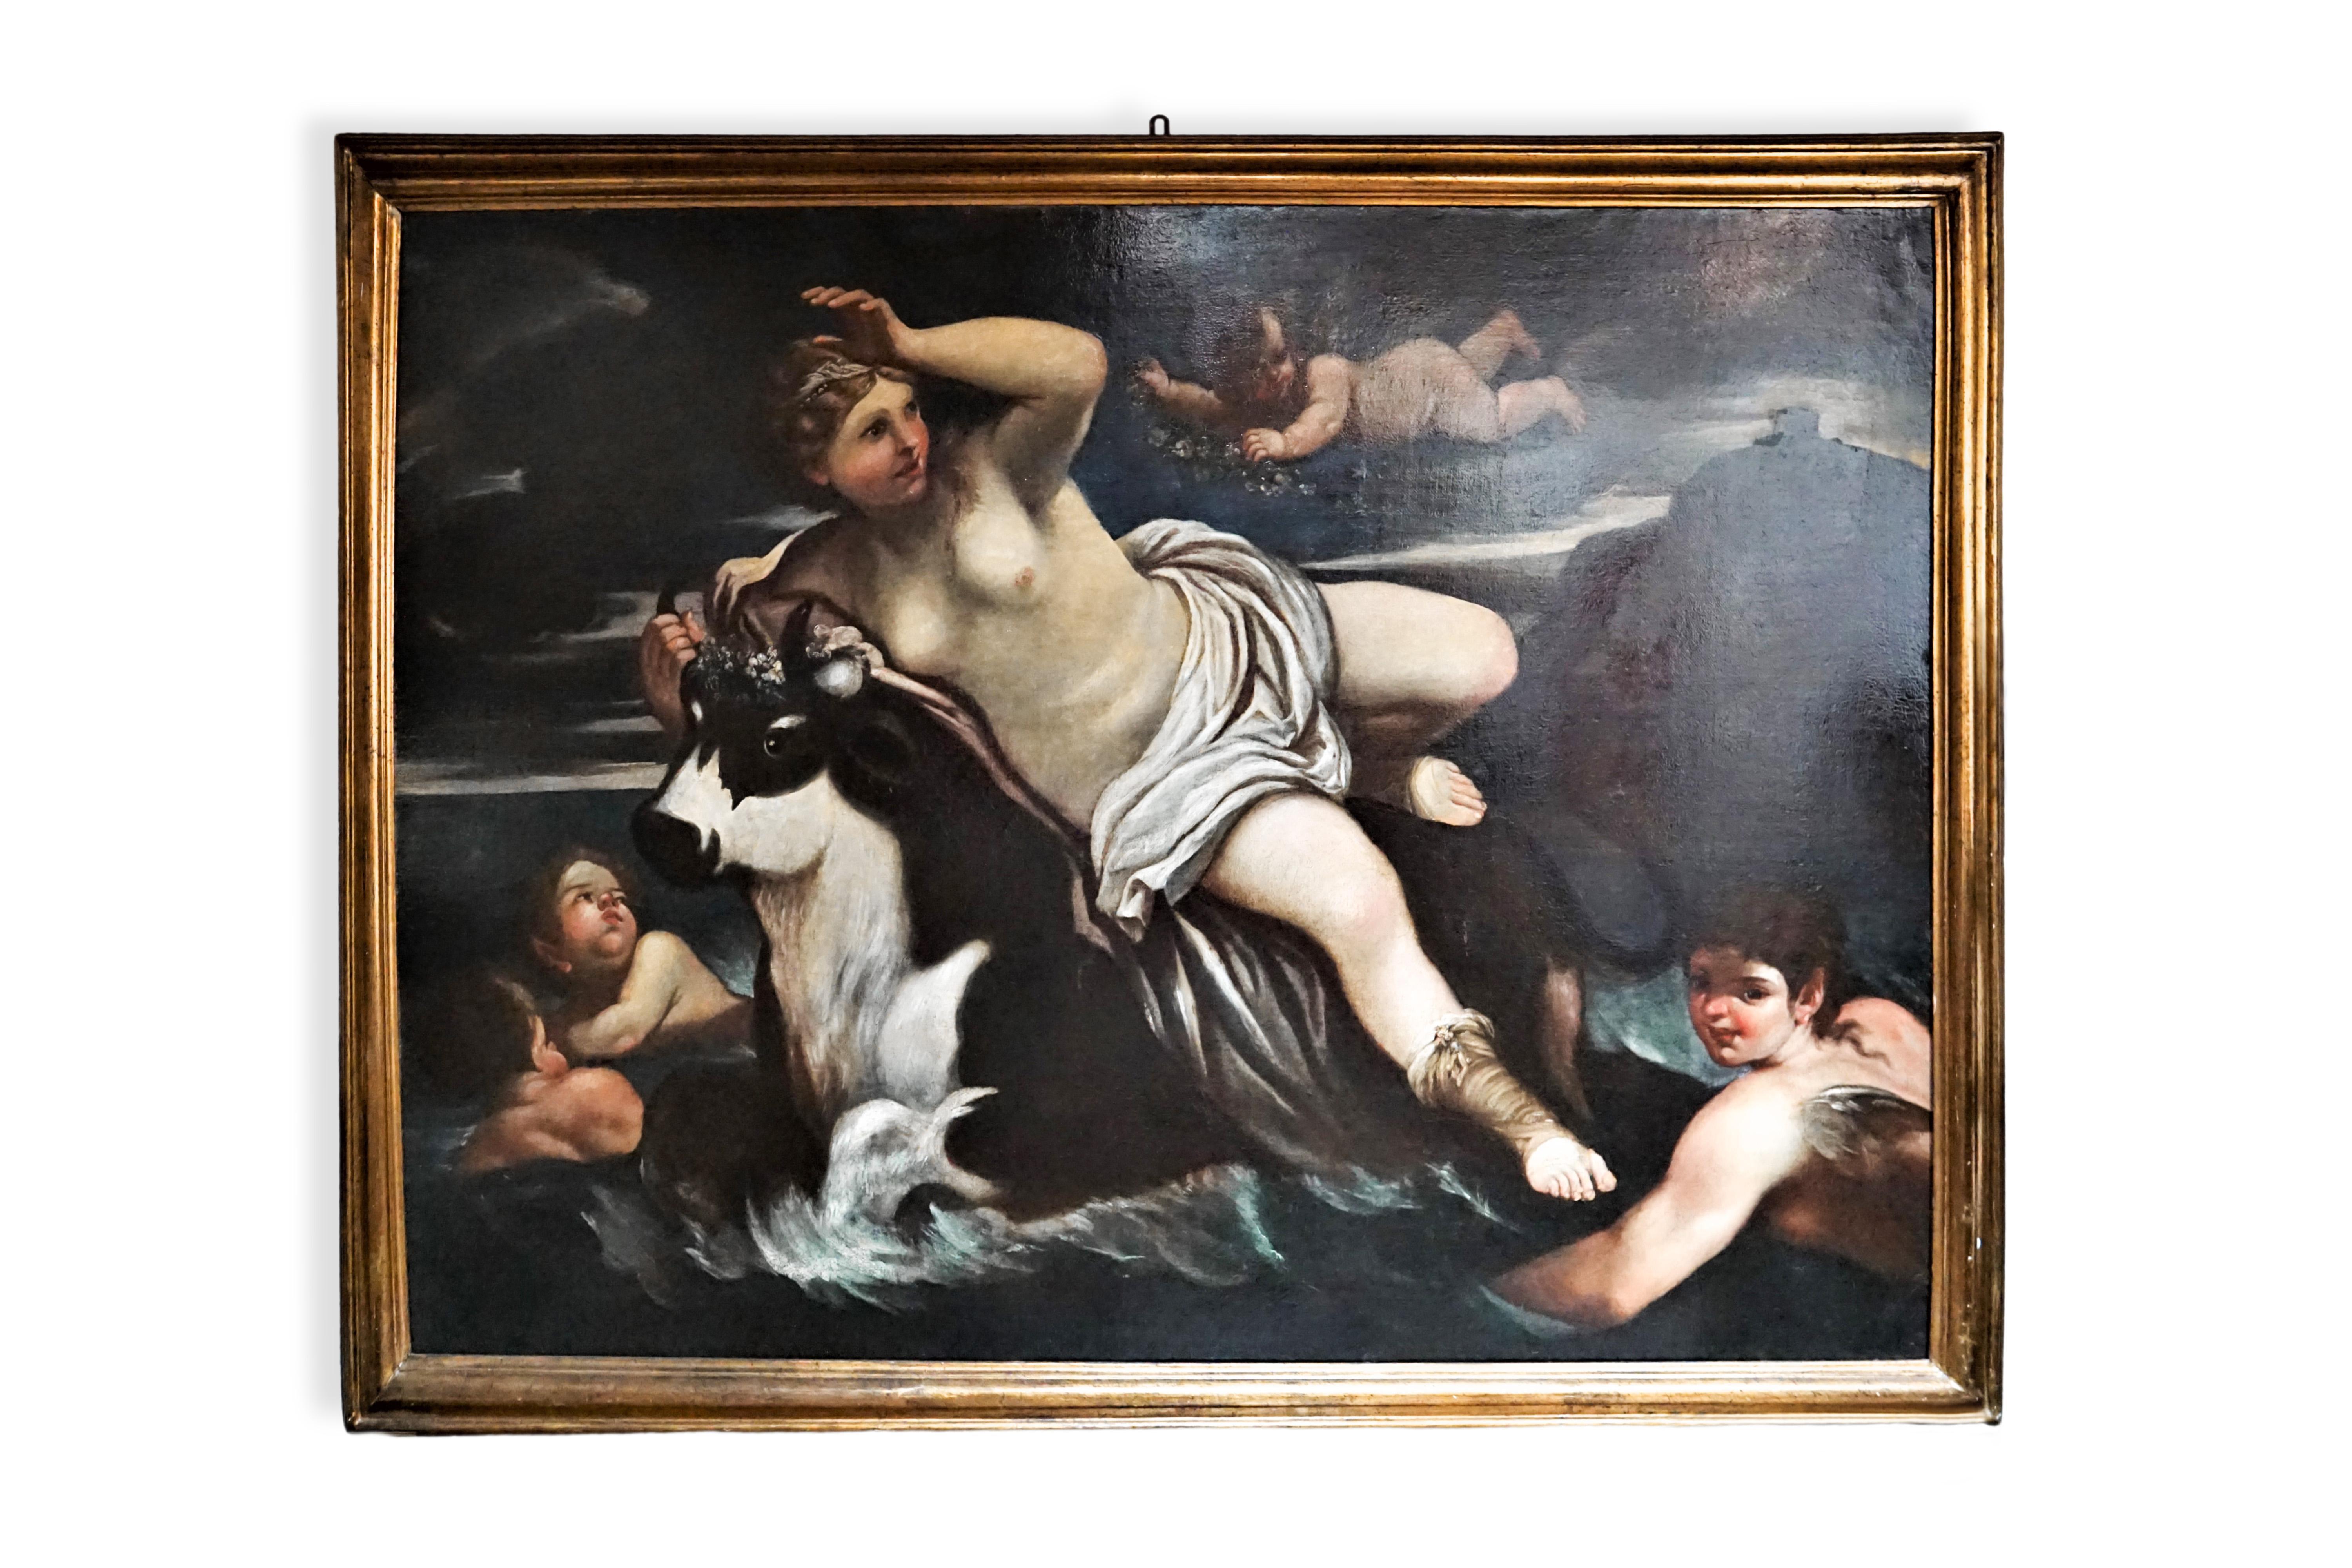 Large oil painting on canvas, Rape of Europe, 18th century, more modern frame. Dimensions: 190x130cm. Good condition - used with small signs of aging & blemishes ADDITIONAL PHOTOS AND INFORMATION CAN BE REQUESTED BY EMAIL. WE SHIP WORLDWIDE, WRITE